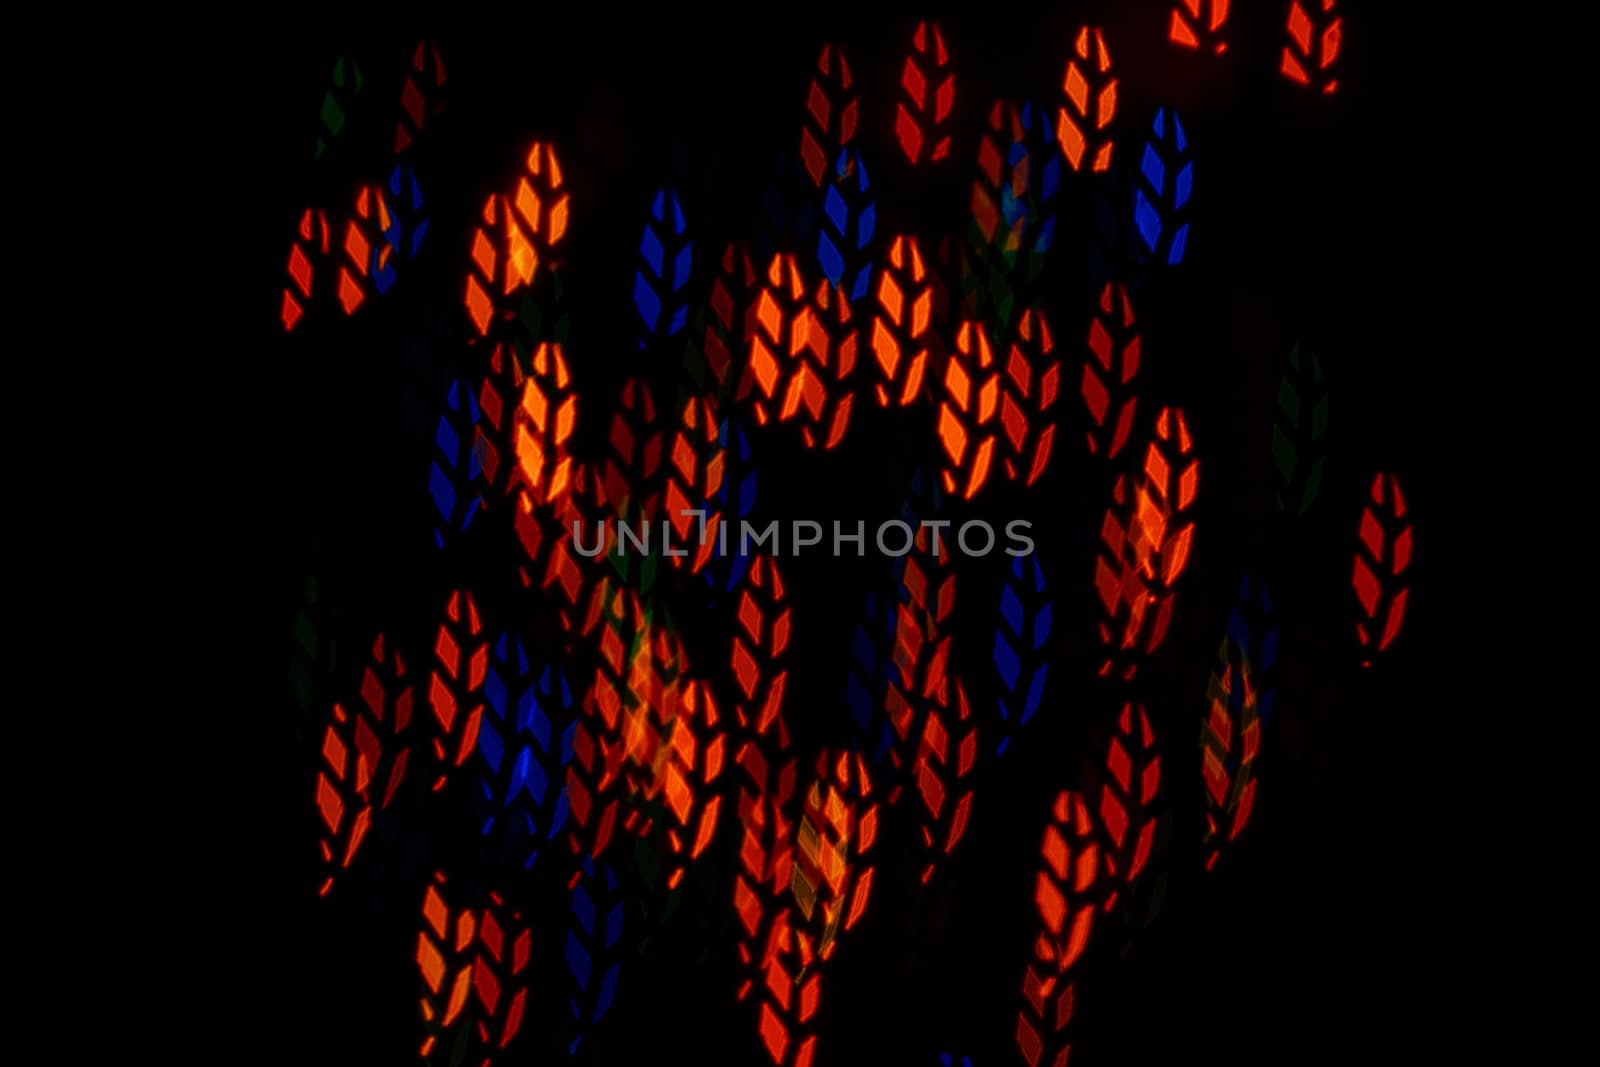 Abstract background foliage by Vagengeym